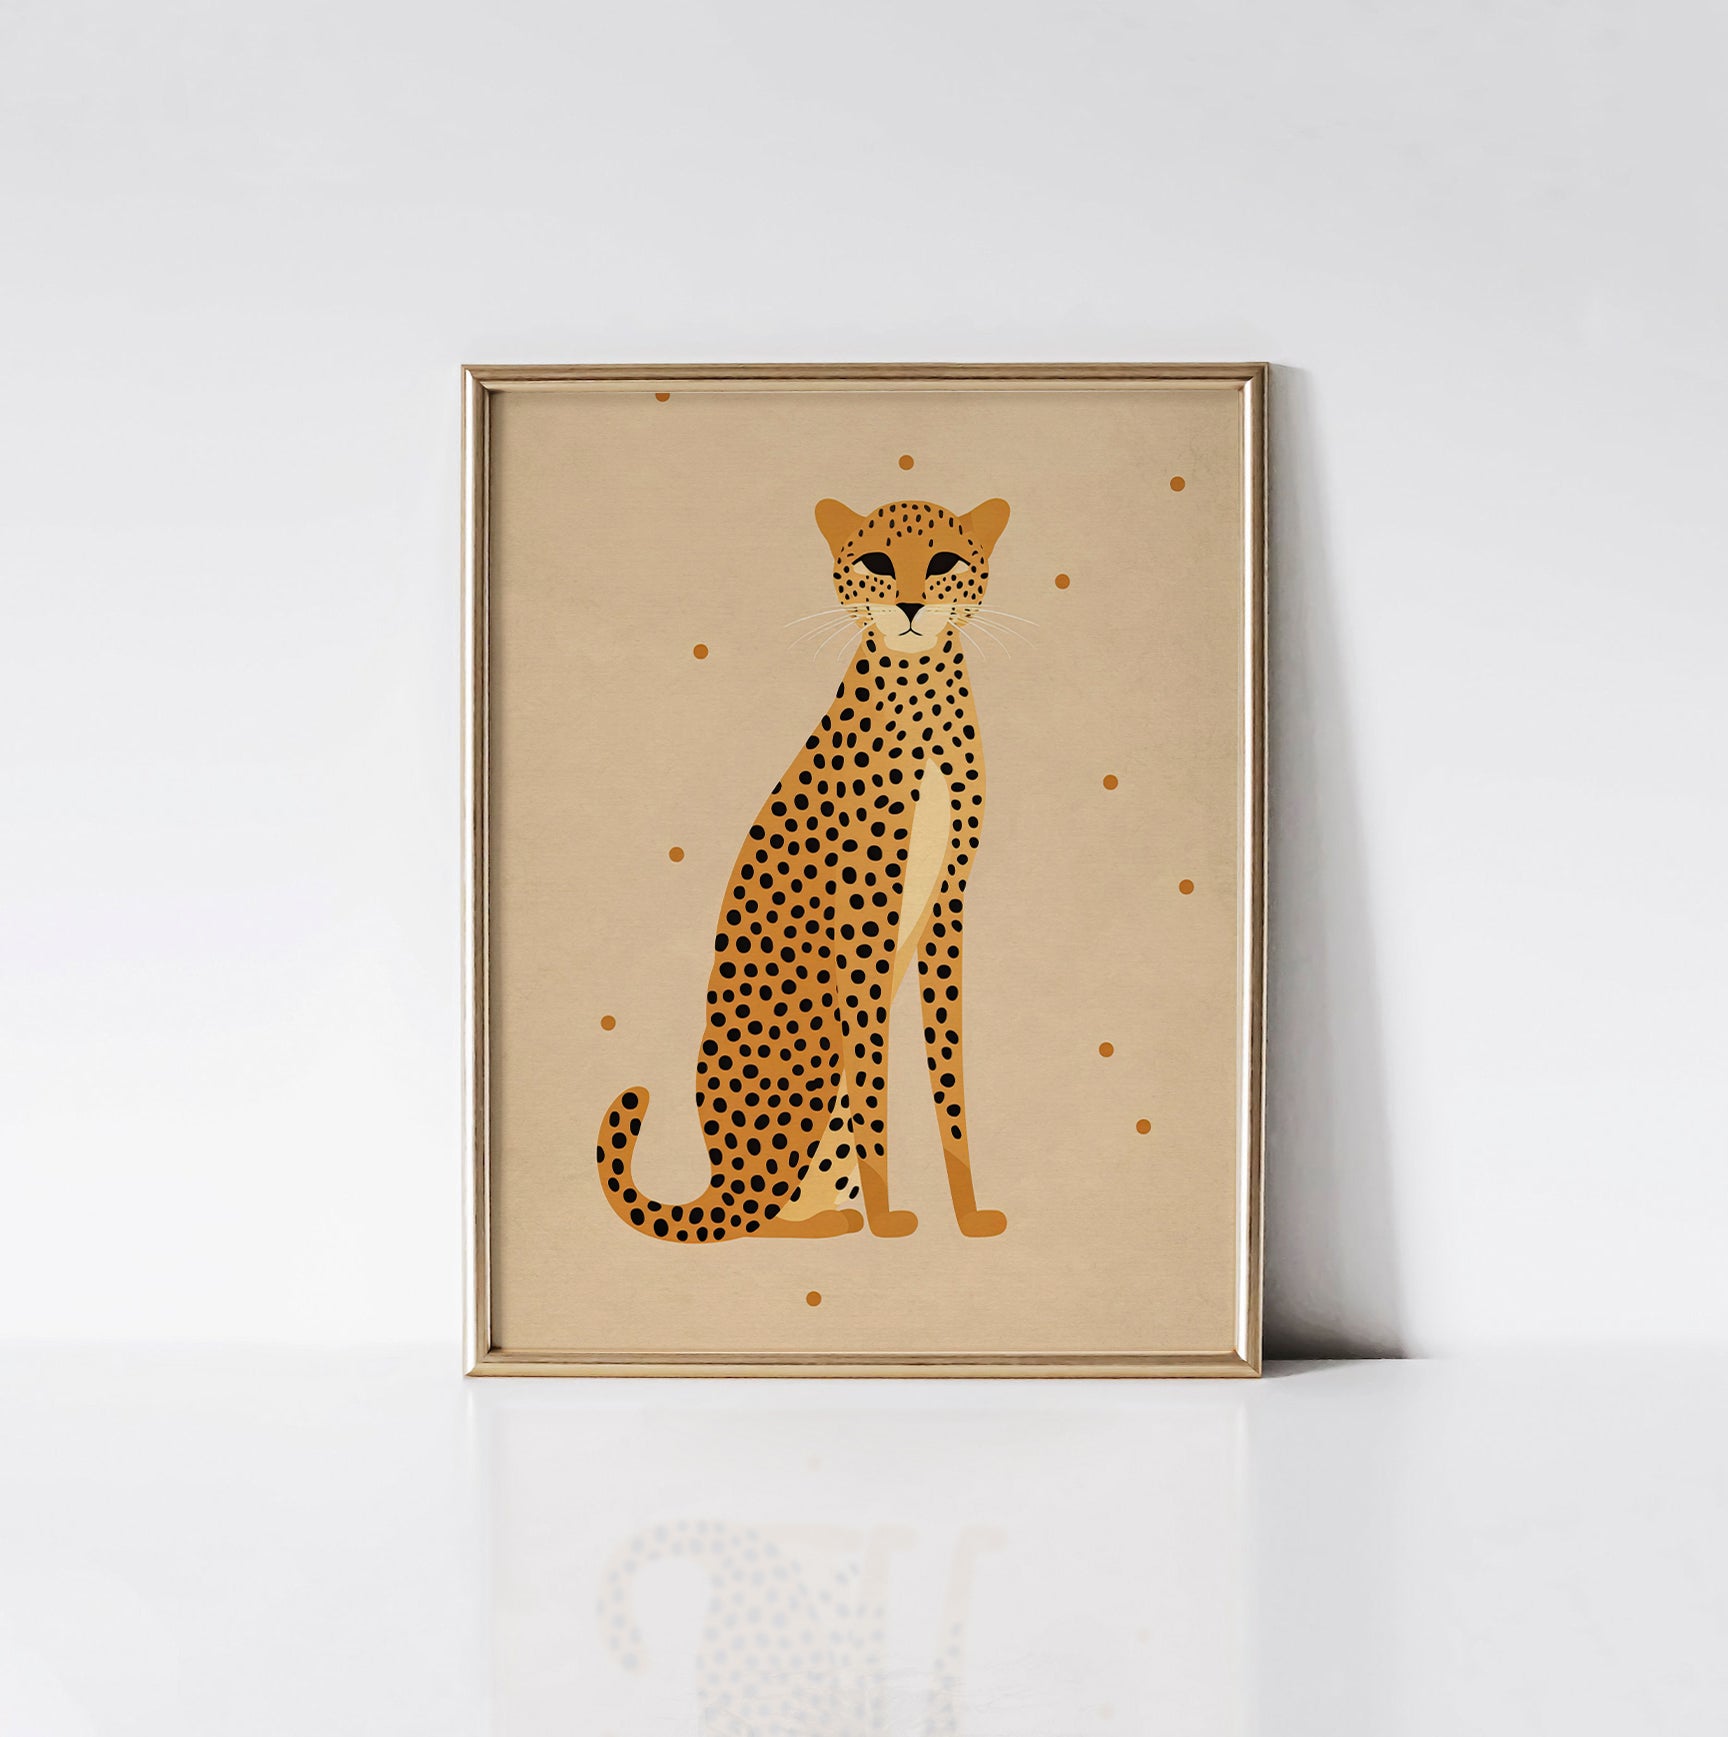 Minimalist Leopard Elegance art print displayed in a sleek gold frame, featuring a poised leopard on a soft beige background with delicate dots.